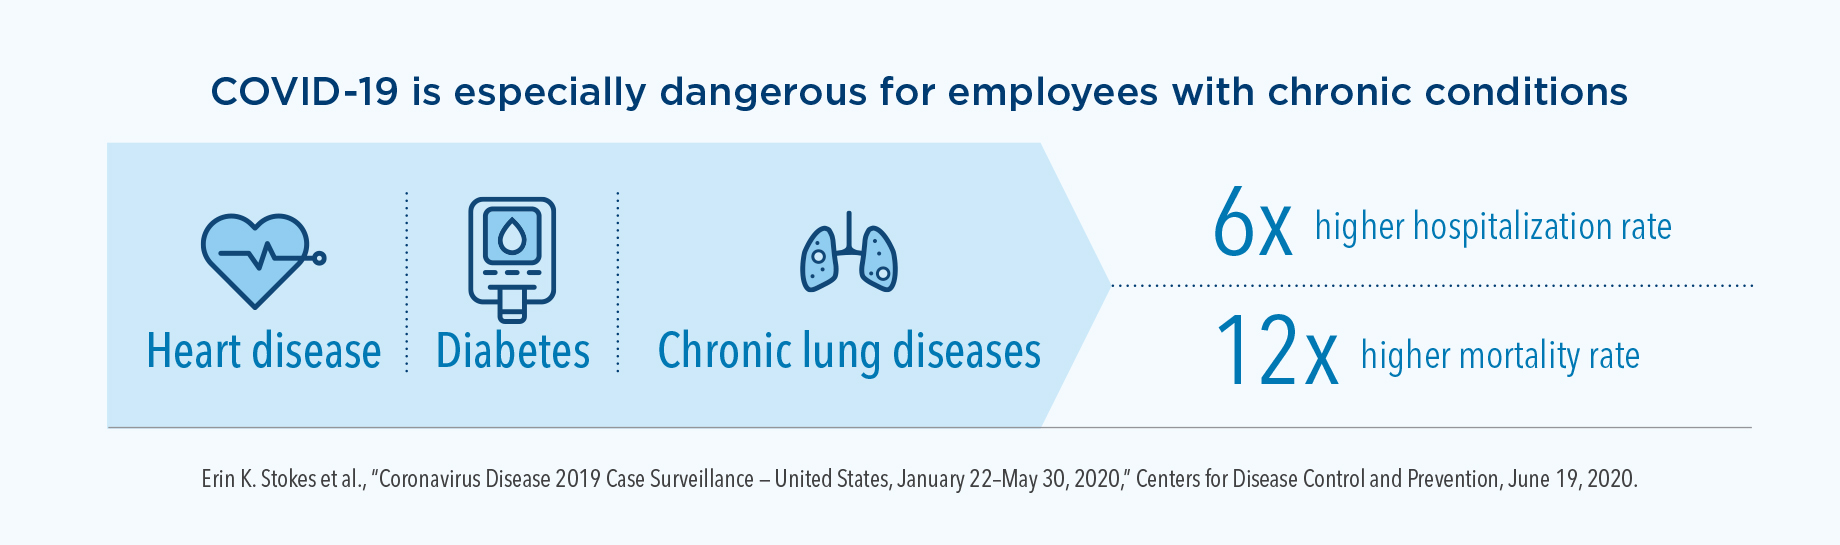 COVID-19 is especially dangerous for employees with chronic conditions. For employees with heart disease, diabetes, or chronic lung diseases, the hospitalization rate is 6 times higher, and the mortality rate is 12 times higher.